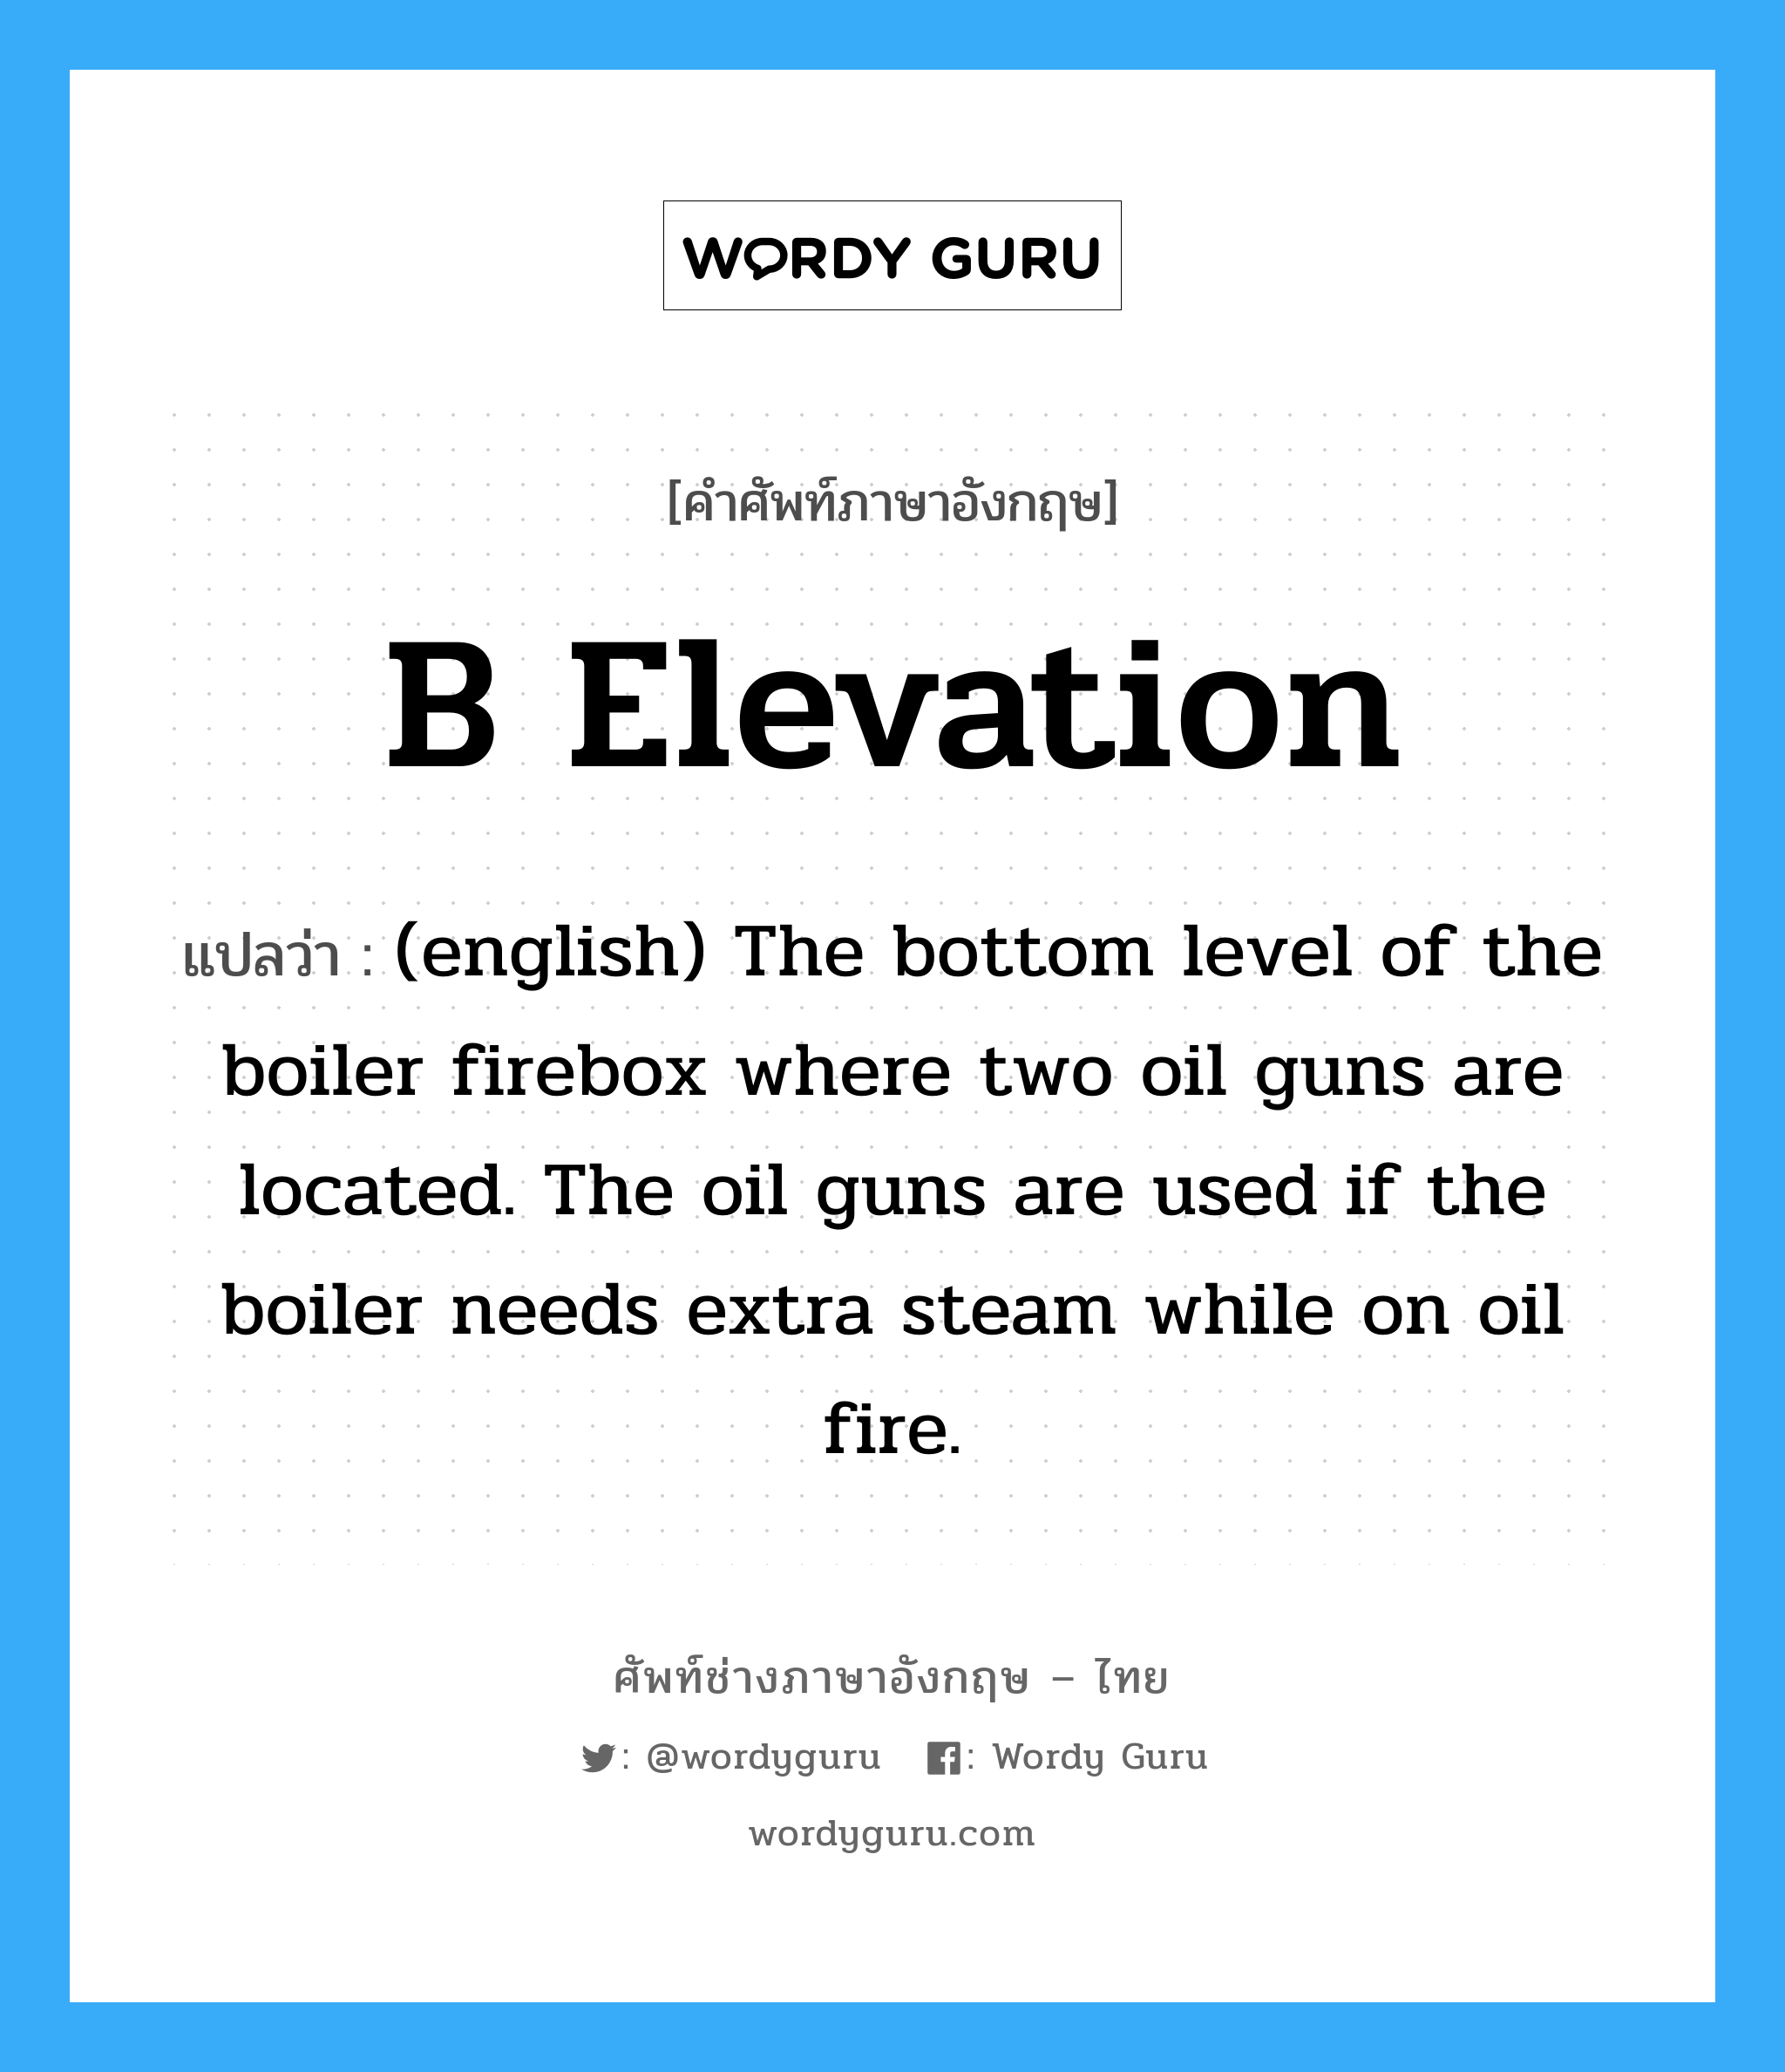 B Elevation แปลว่า?, คำศัพท์ช่างภาษาอังกฤษ - ไทย B Elevation คำศัพท์ภาษาอังกฤษ B Elevation แปลว่า (english) The bottom level of the boiler firebox where two oil guns are located. The oil guns are used if the boiler needs extra steam while on oil fire.